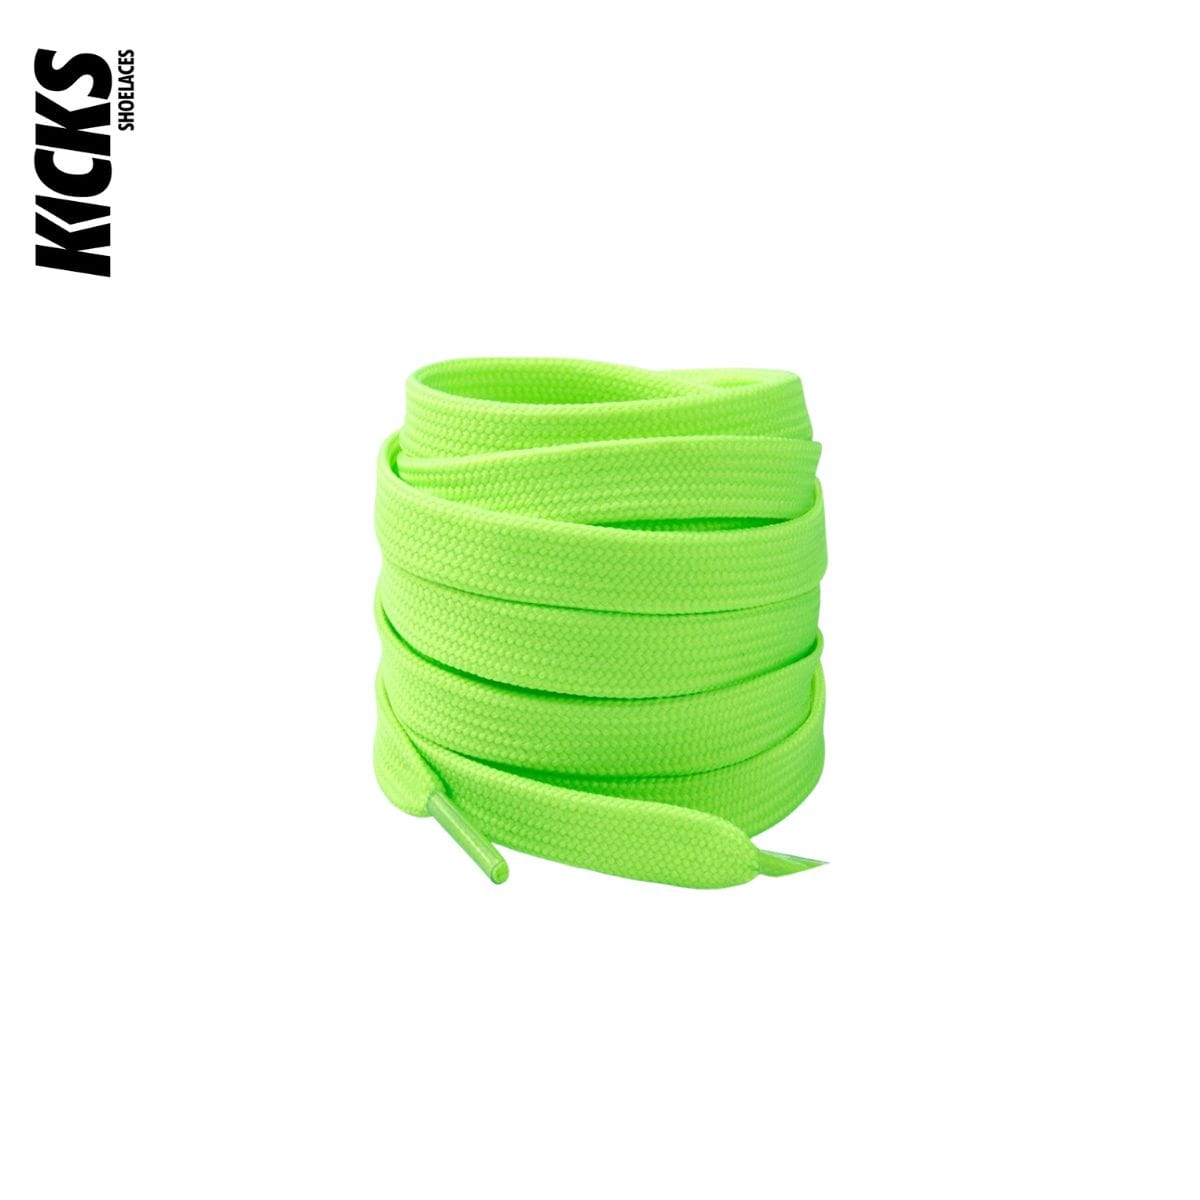 Green Replacement Shoe Laces for Adidas NMD Sneakers by Kicks Shoelaces